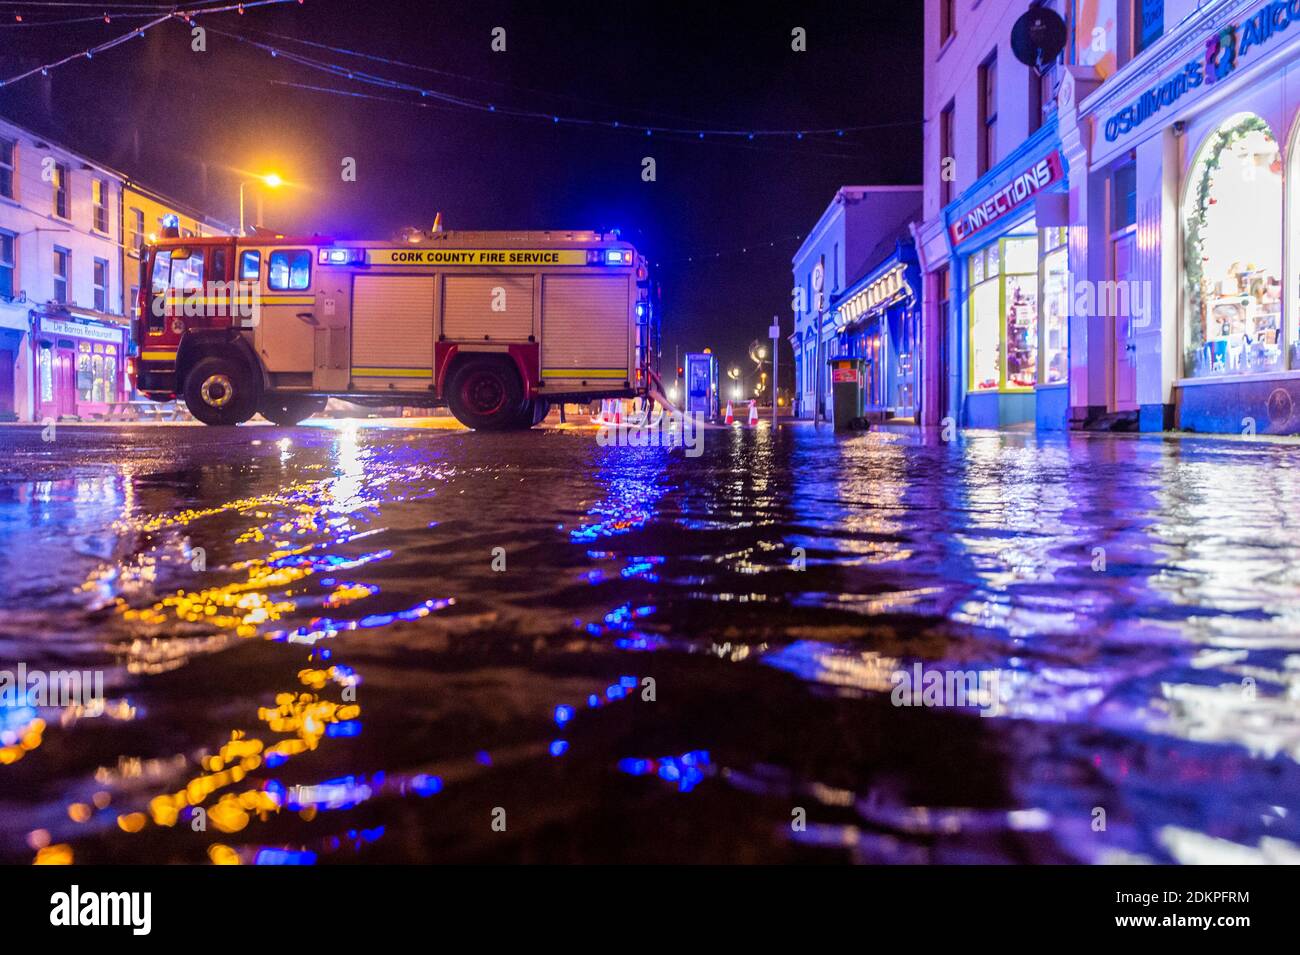 Bantry, West Cork, Ireland. 16th Dec, 2020. Bantry town square flooded this morning before high tide. The County Council and Fire Brigade successfully pumped the flood water away from the businesses and no property damage was caused. Credit: AG News/Alamy Live News Stock Photo